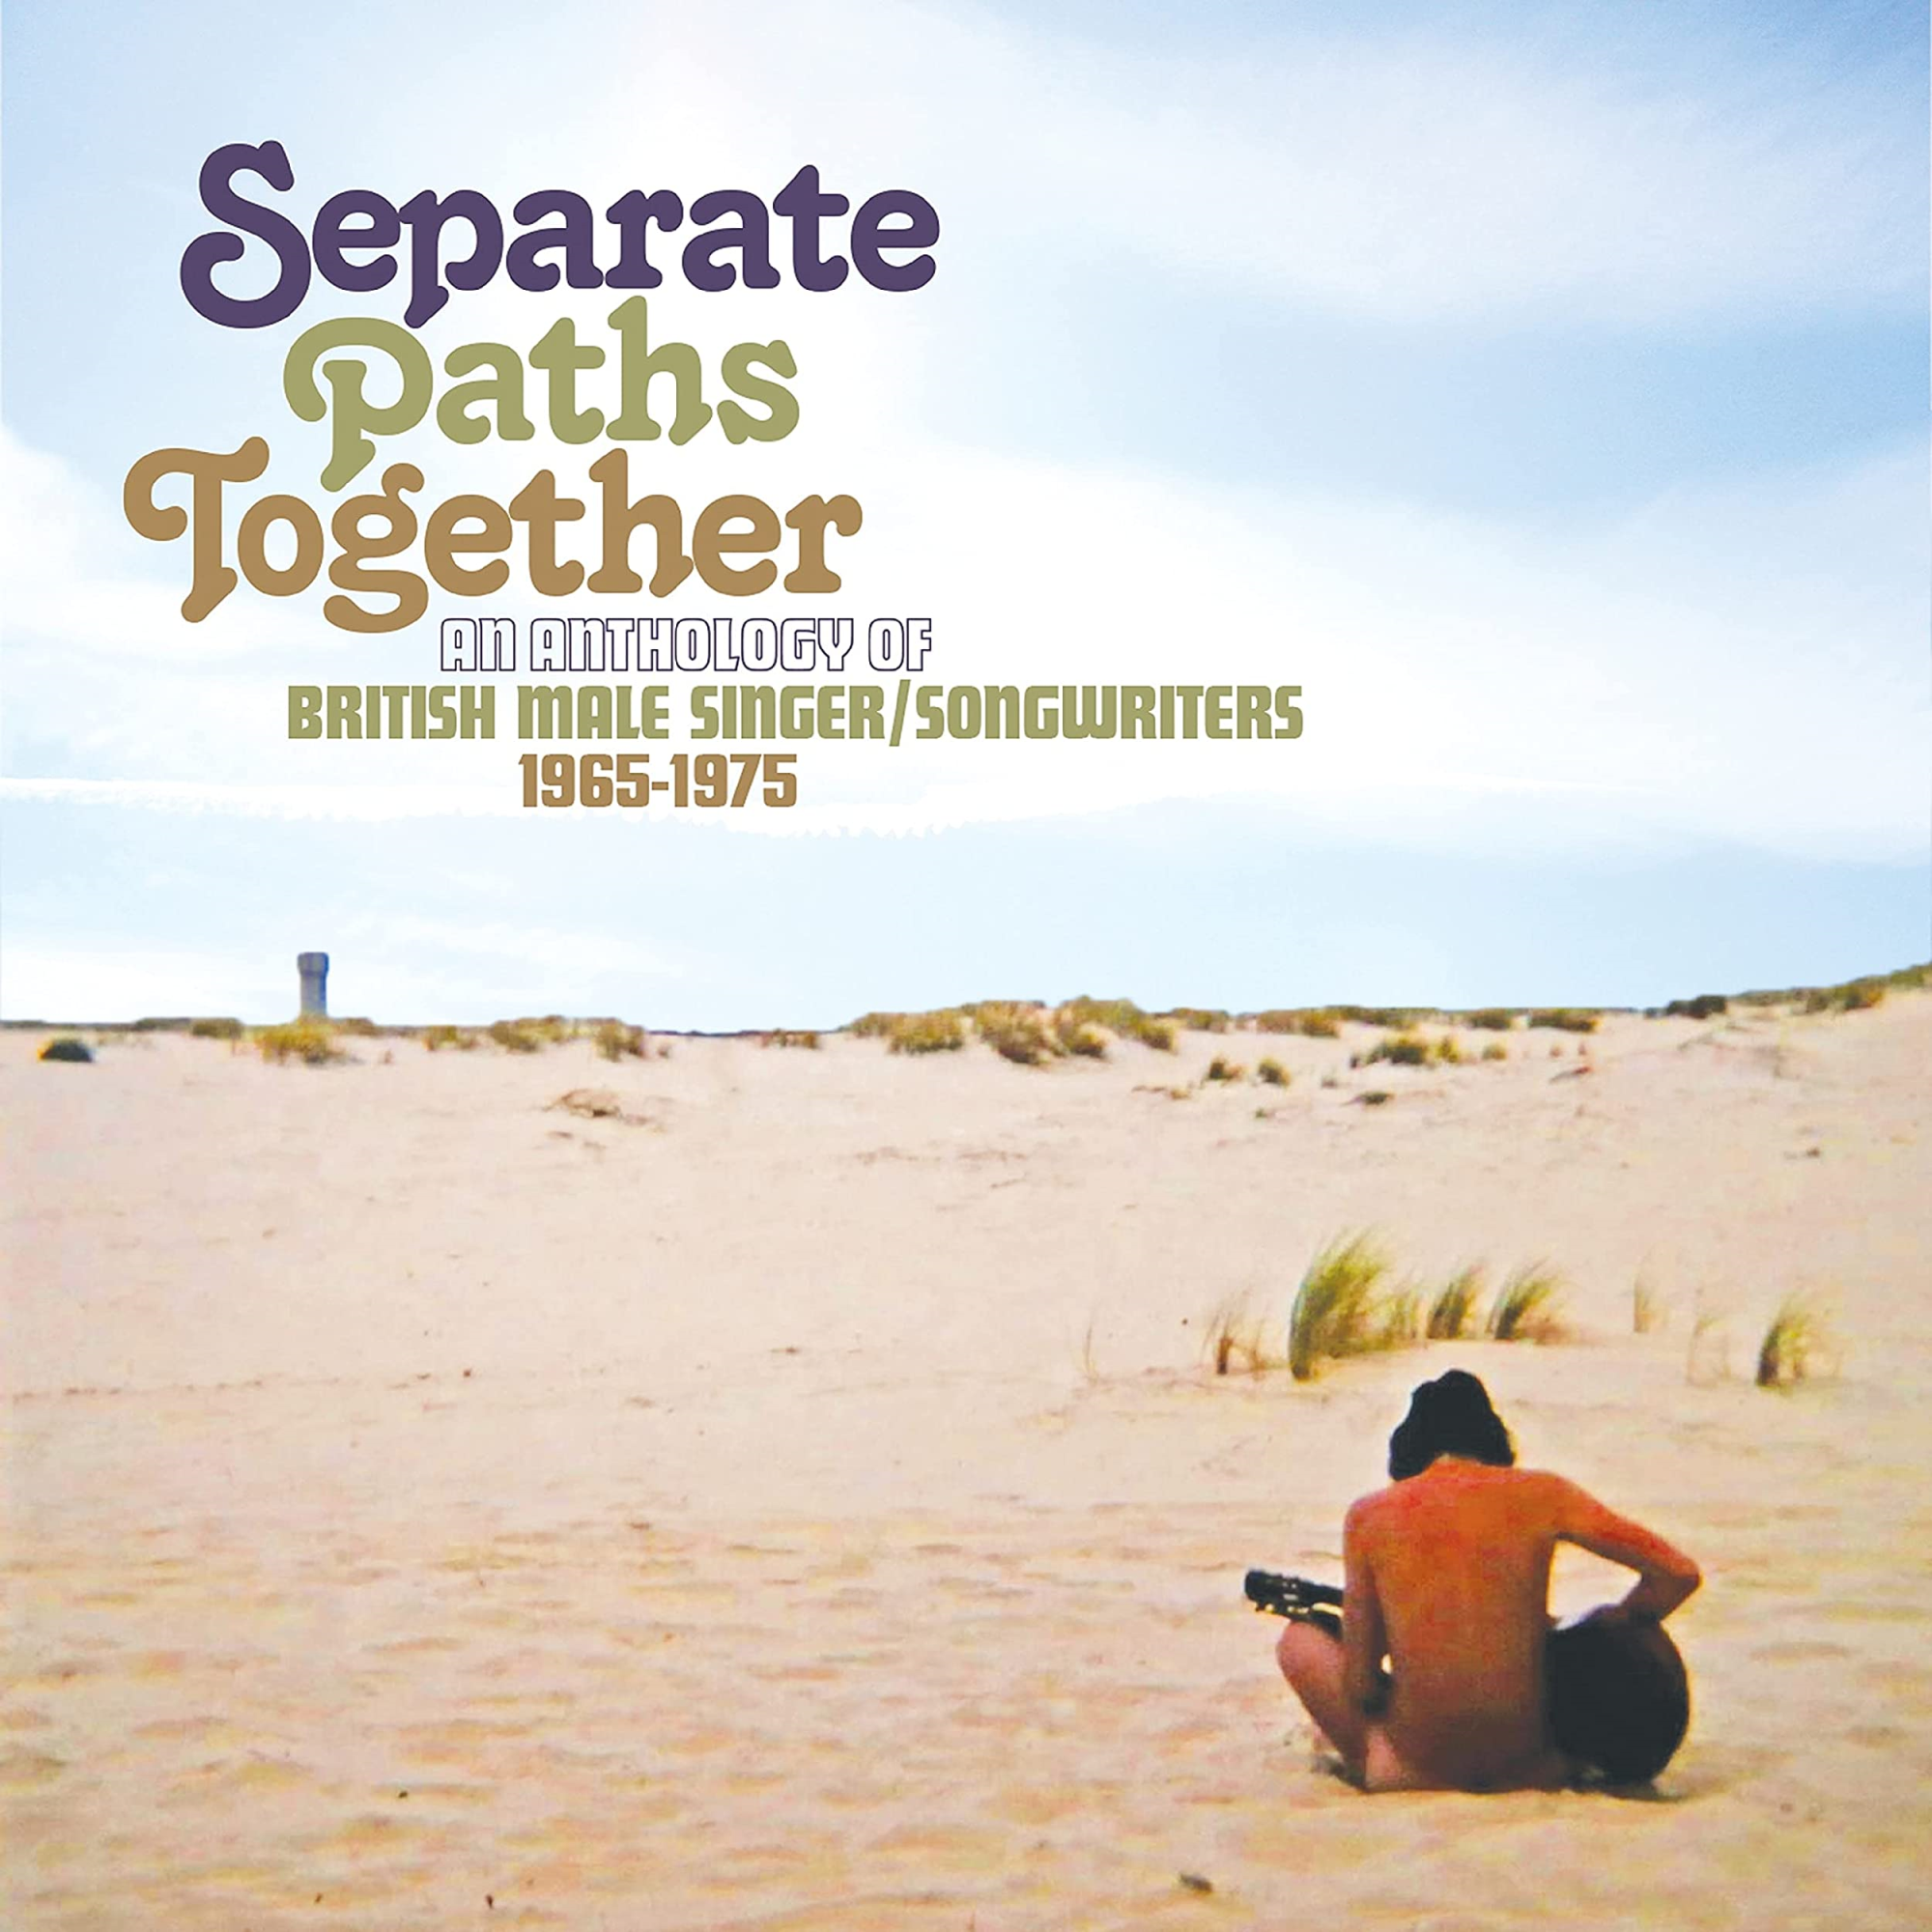 Audio Cd Separate Paths Together: An Anthology Of British Male Singer/Songwriters 1965-1975 (3 Cd) NUOVO SIGILLATO, EDIZIONE DEL 30/07/2021 SUBITO DISPONIBILE